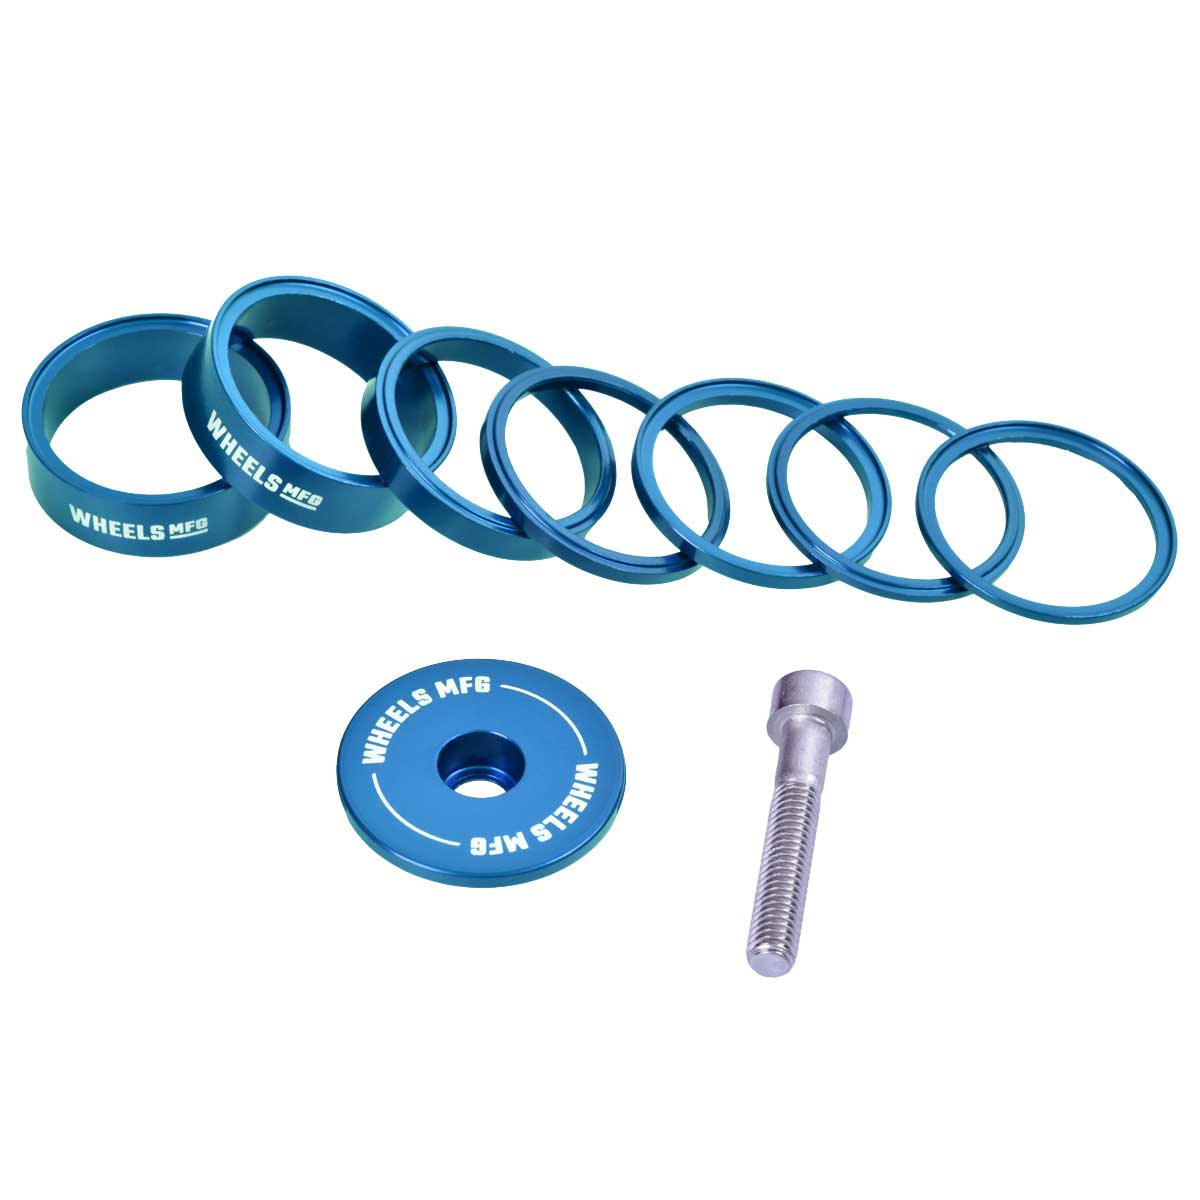 Headset Spacer Kits